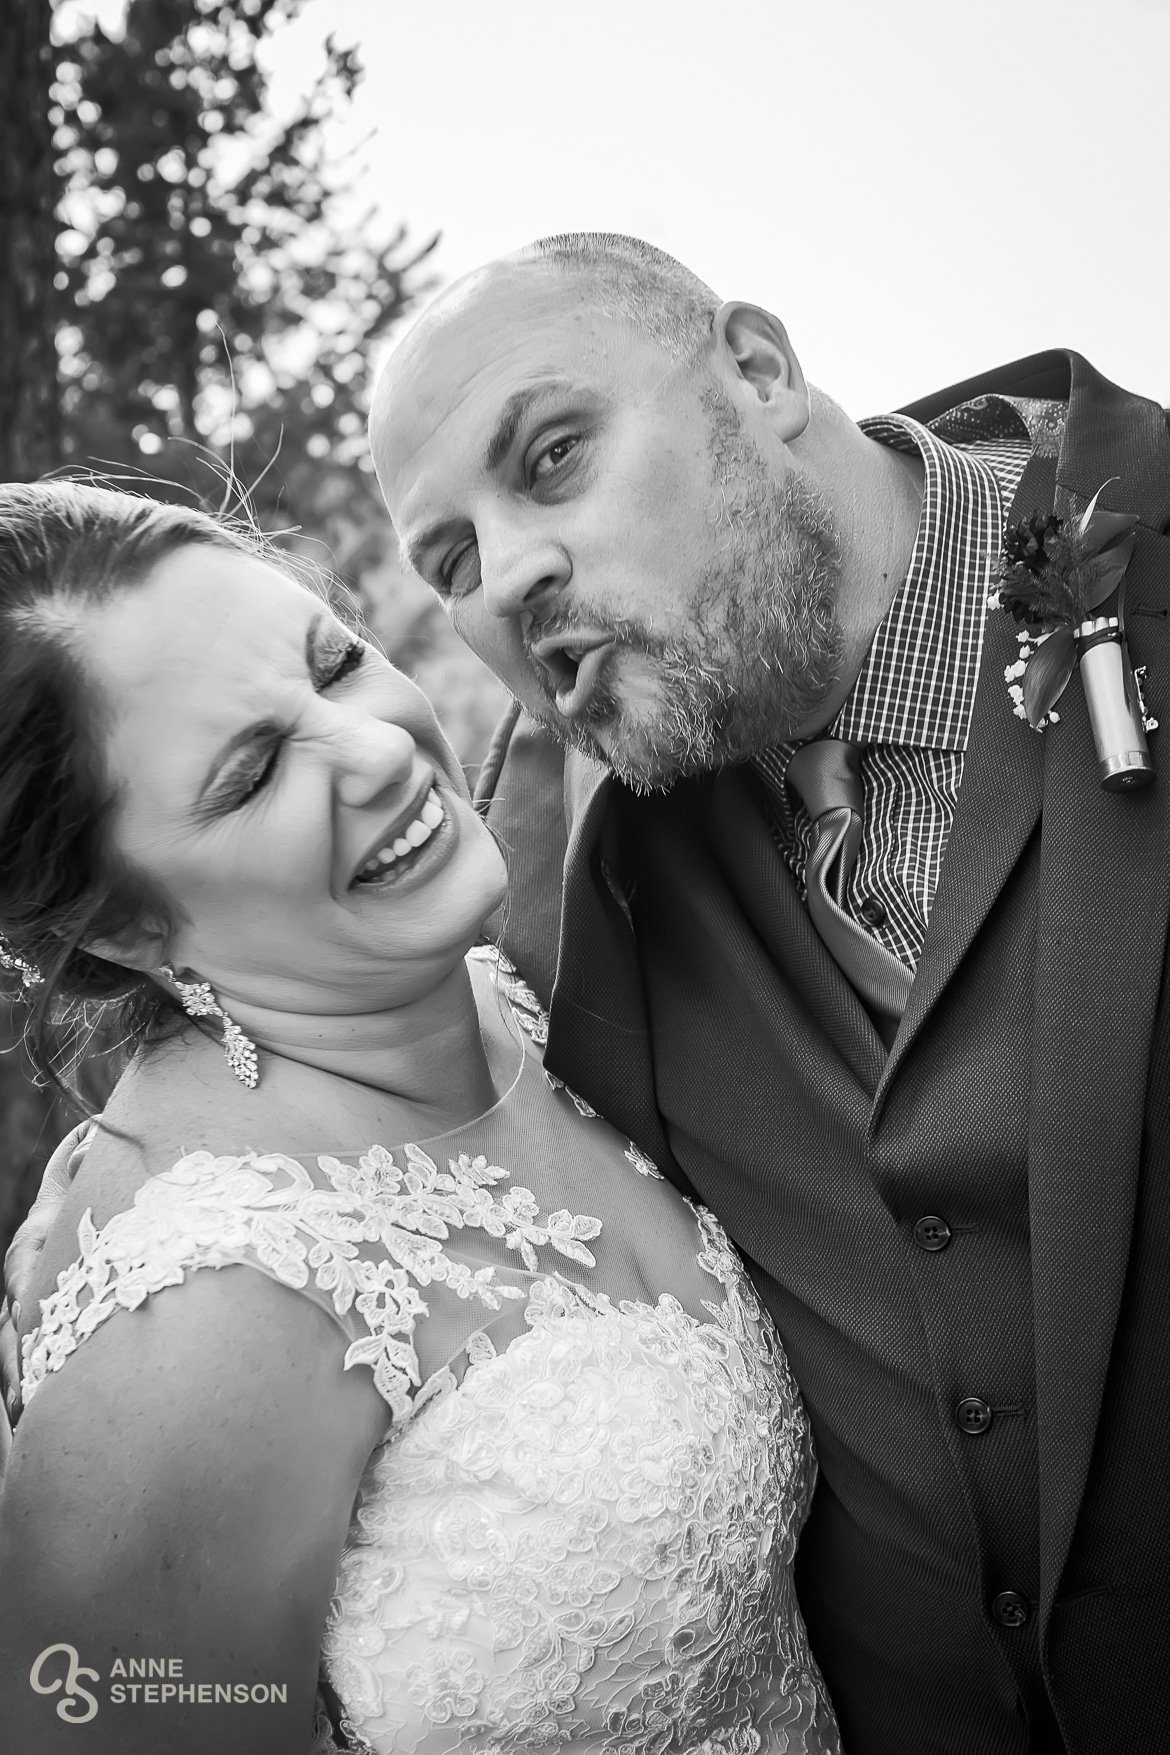 The groom makes a silly face for the bride before giving her a kiss.